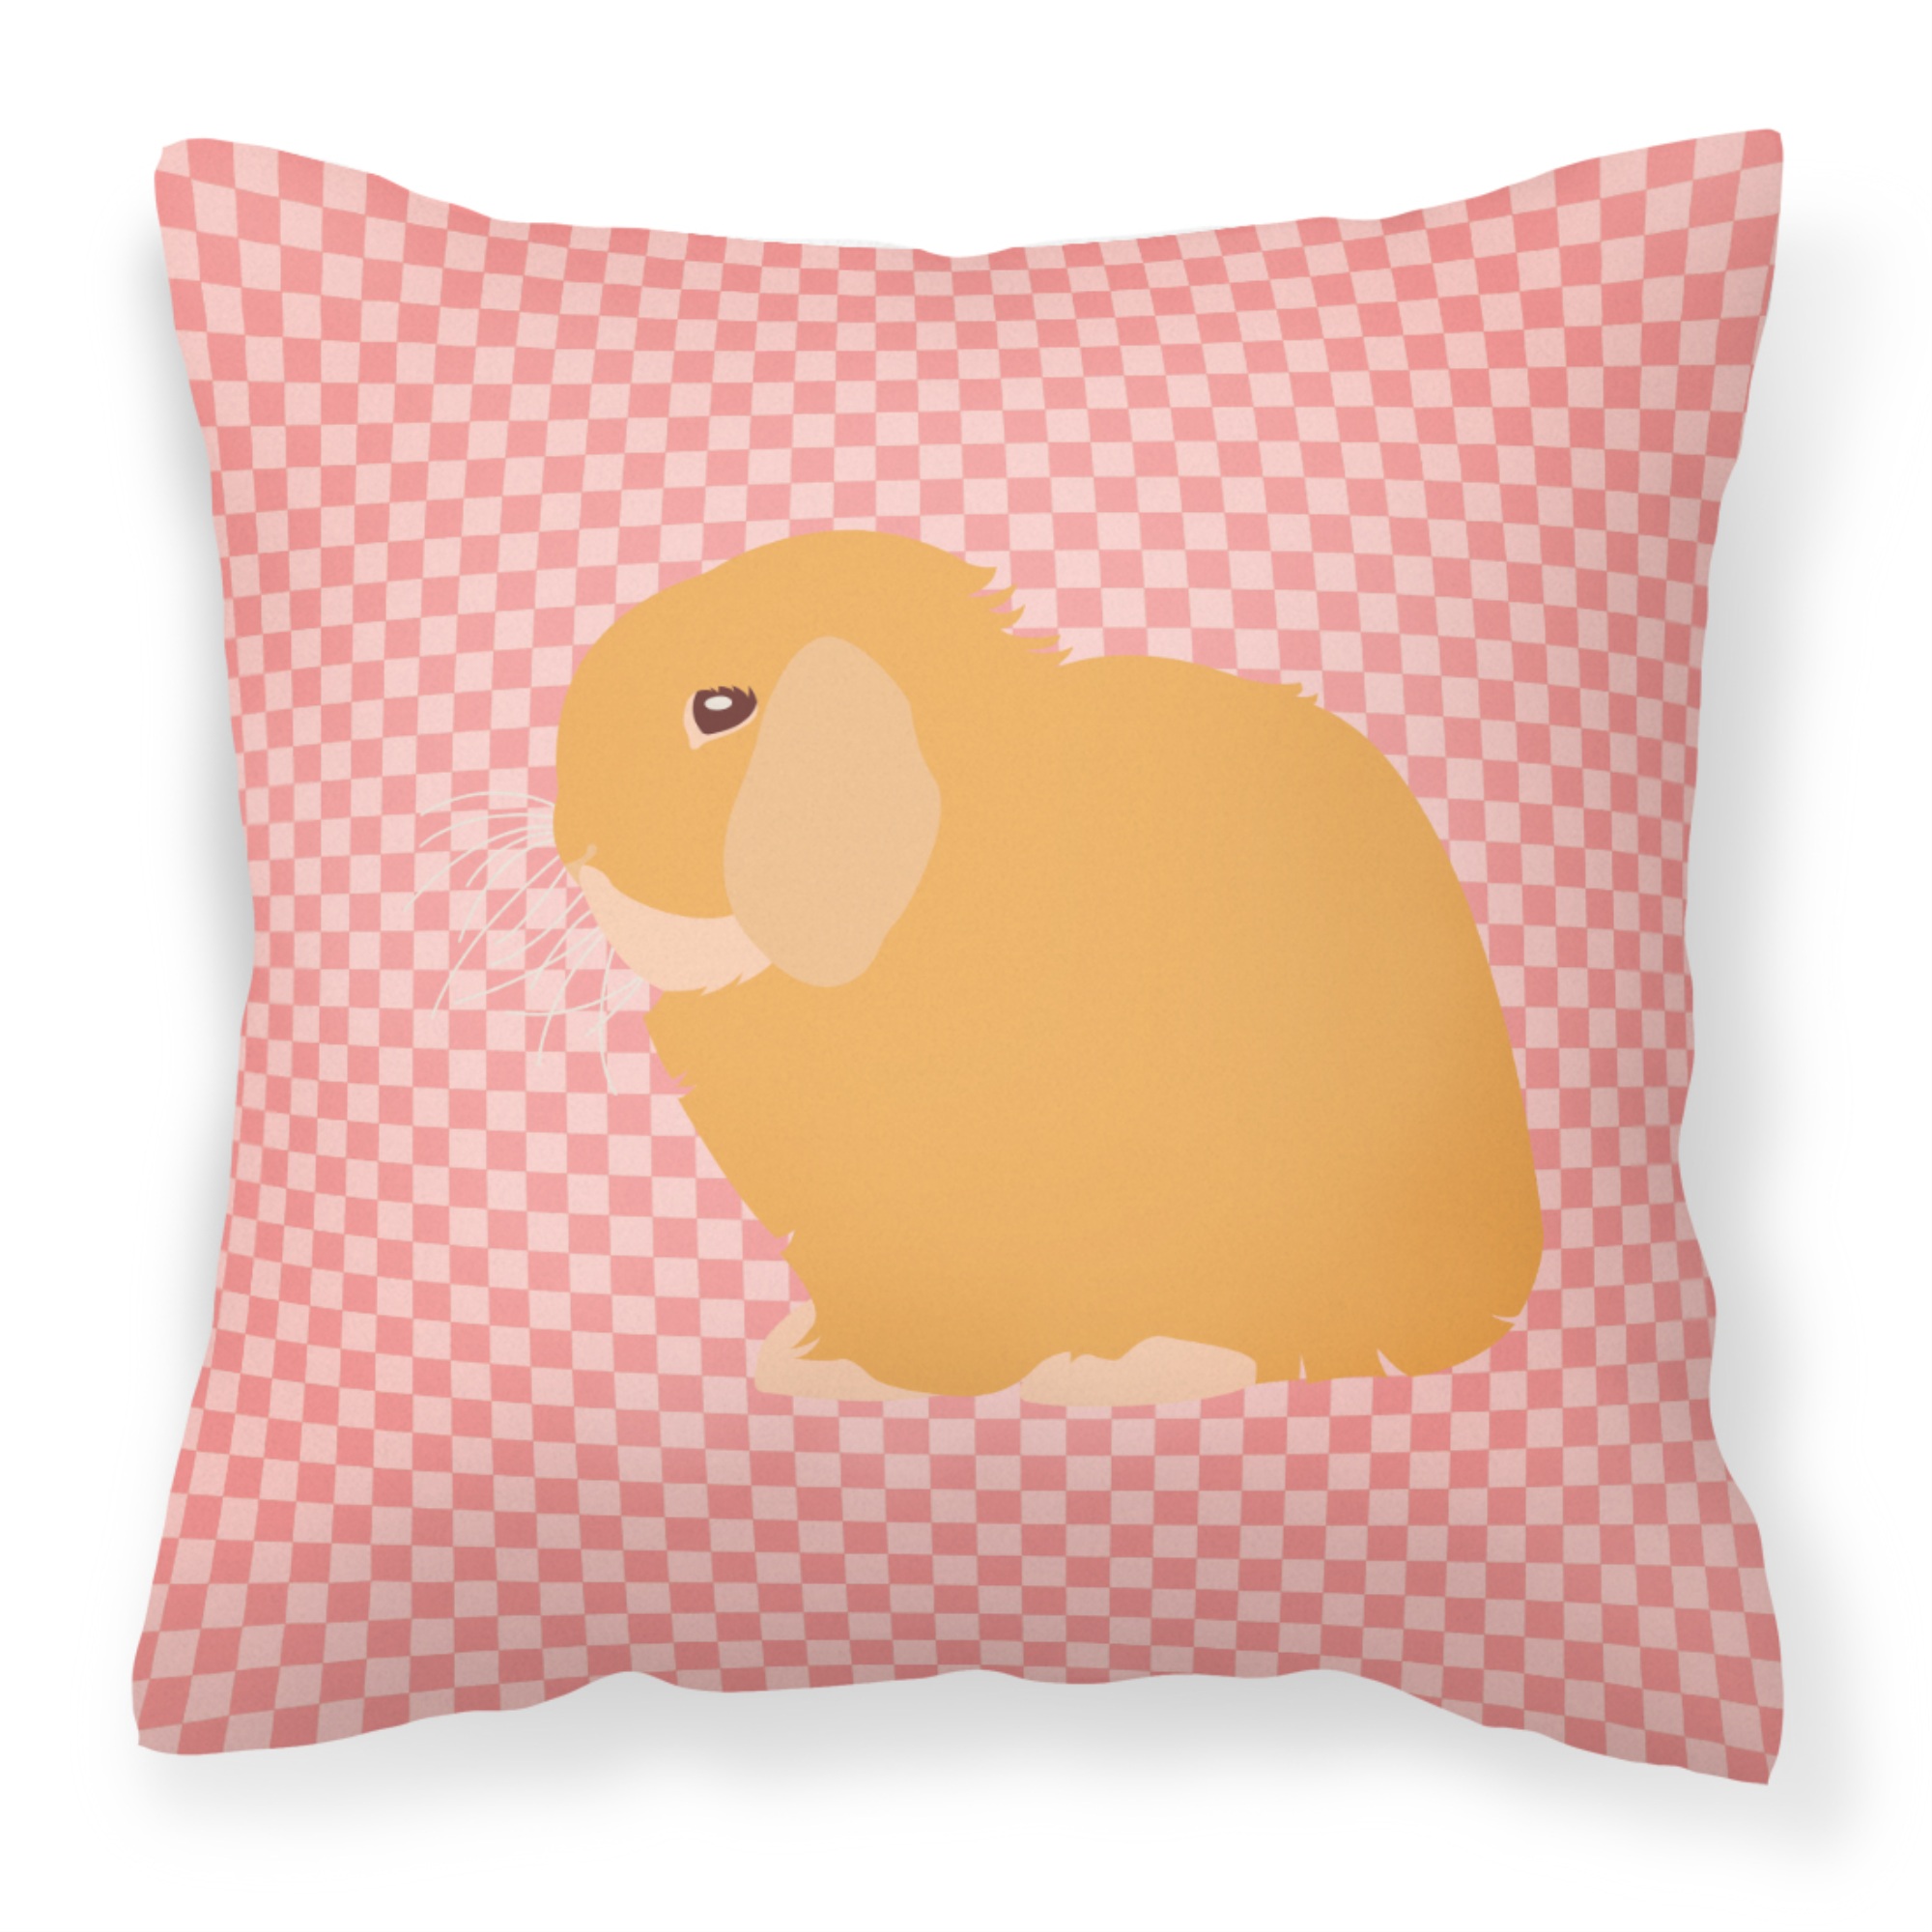 Caroline's Treasures "Caroline's Treasures BB7968PW1818 Holland Lop Rabbit Pink Check Outdoor Canvas Fabric Decorative Pillow, Multicolor"